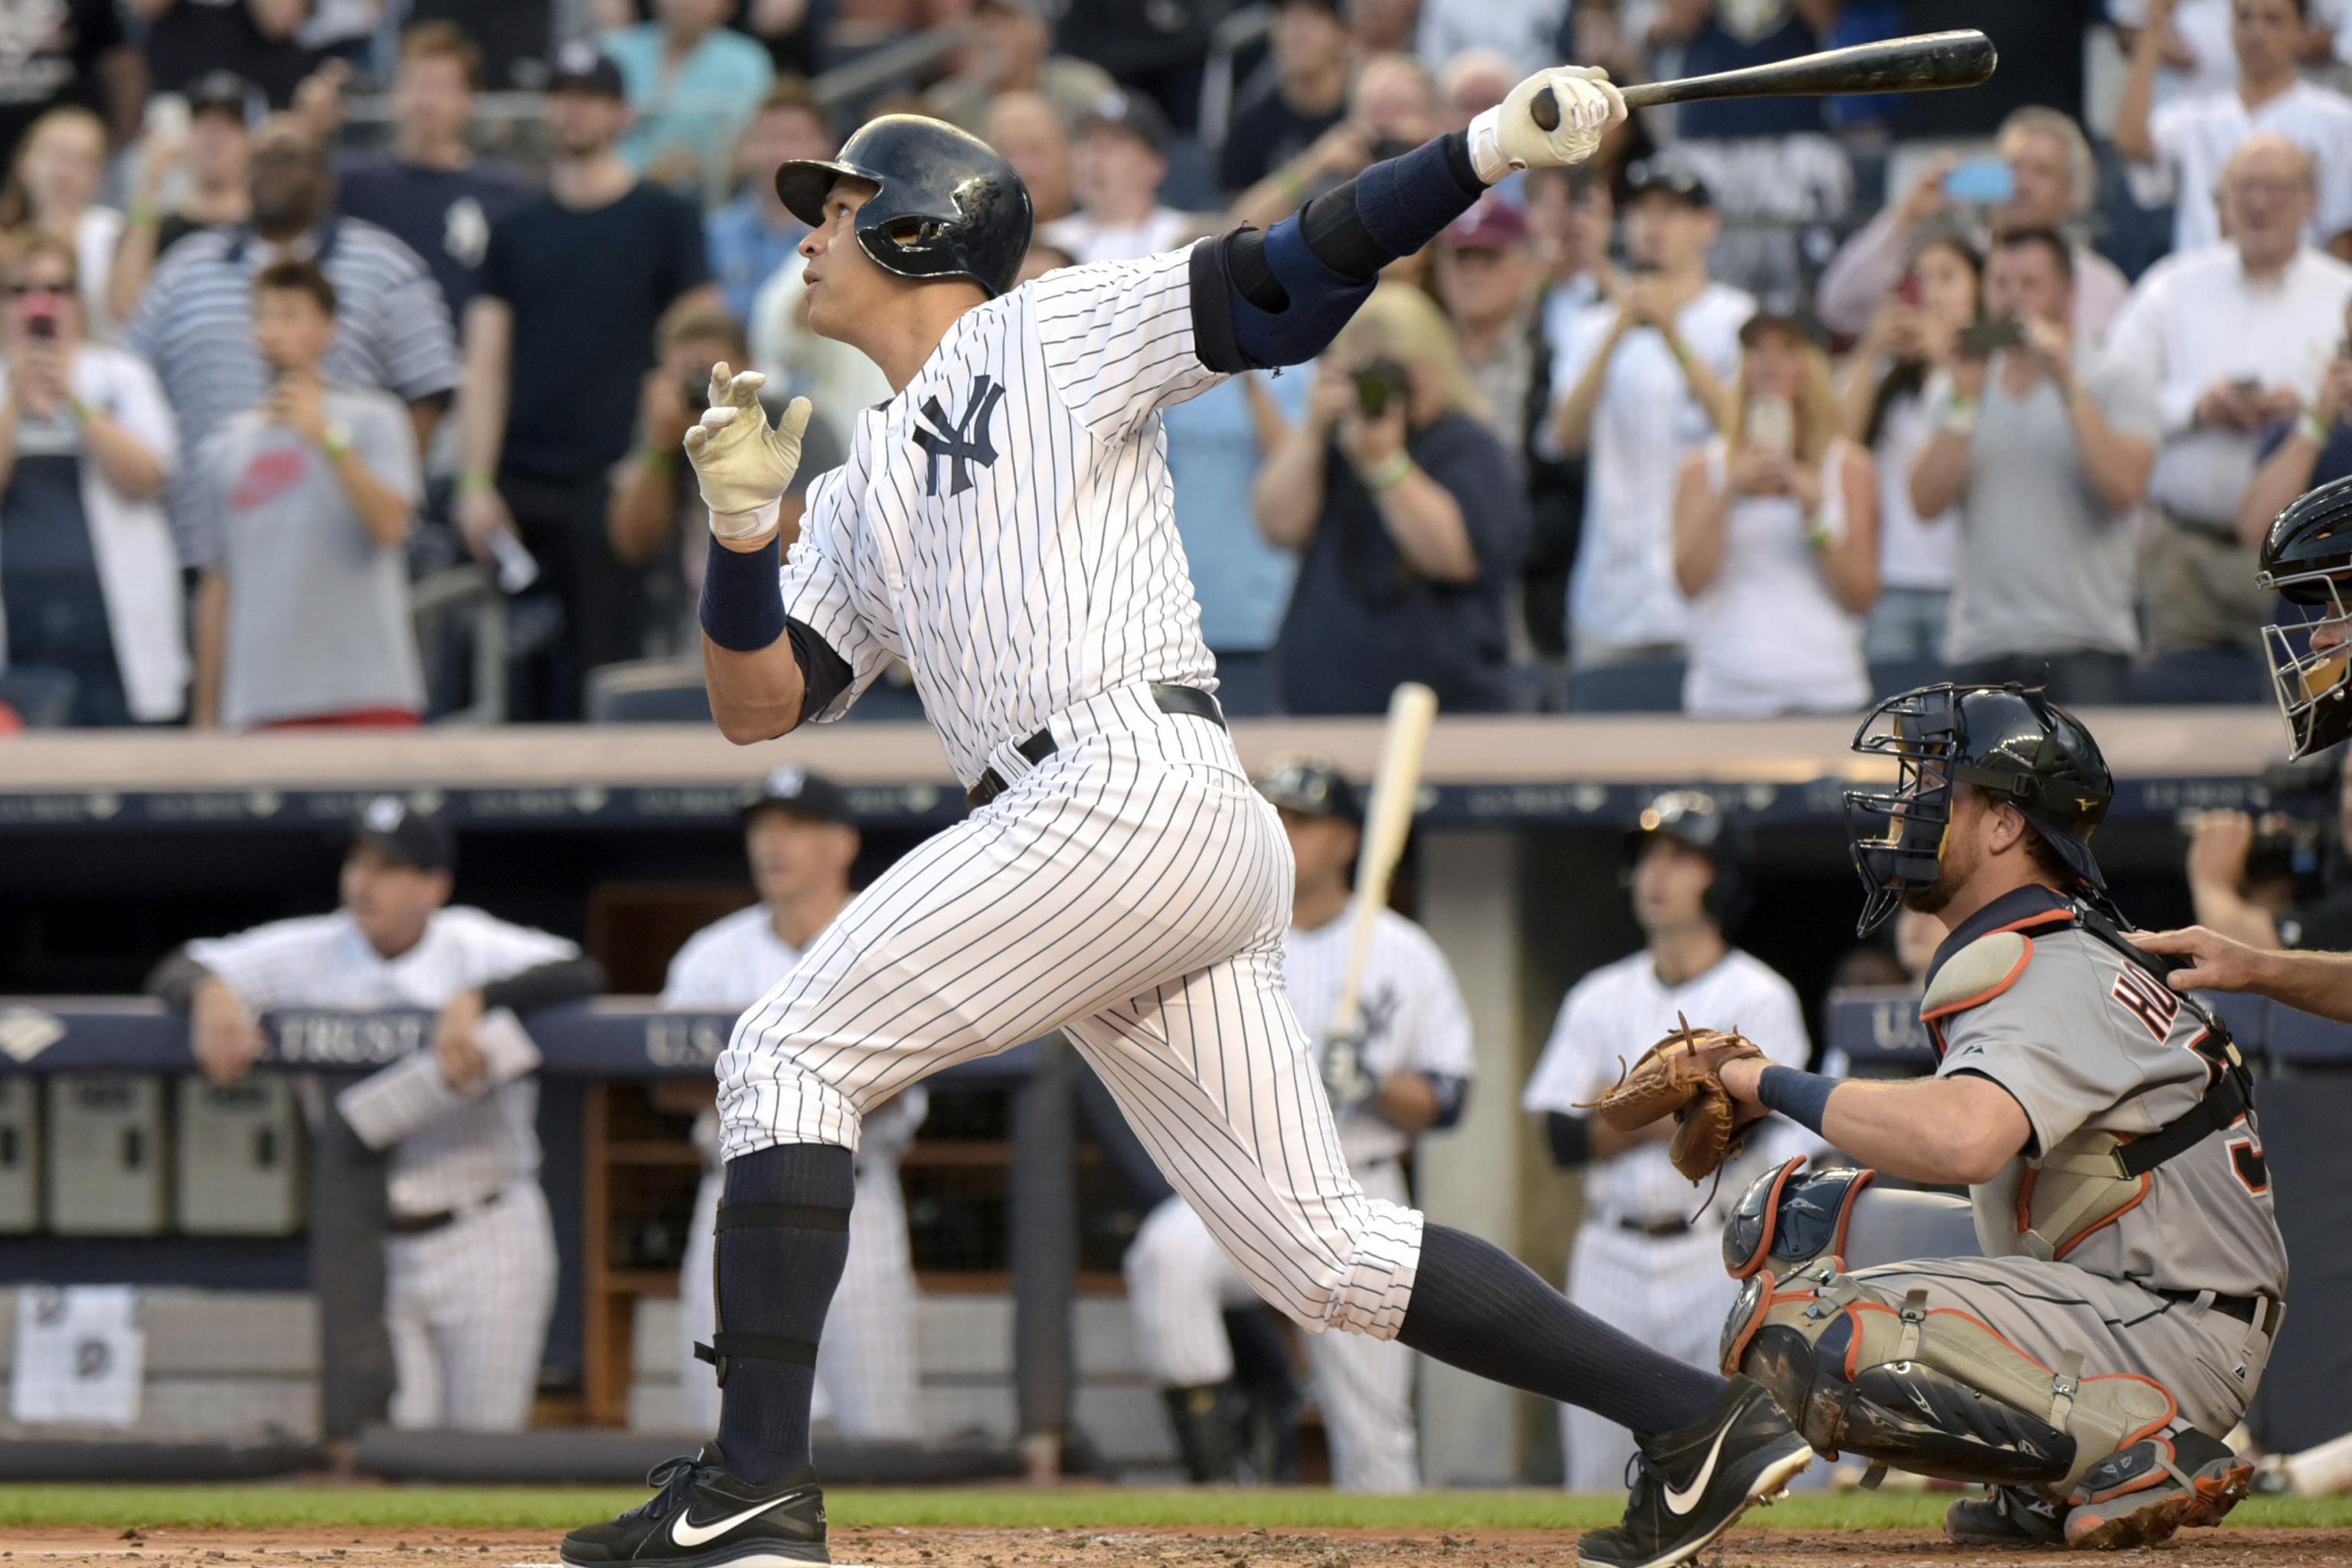 A-Rod's double gives Yankees 3-1 series lead